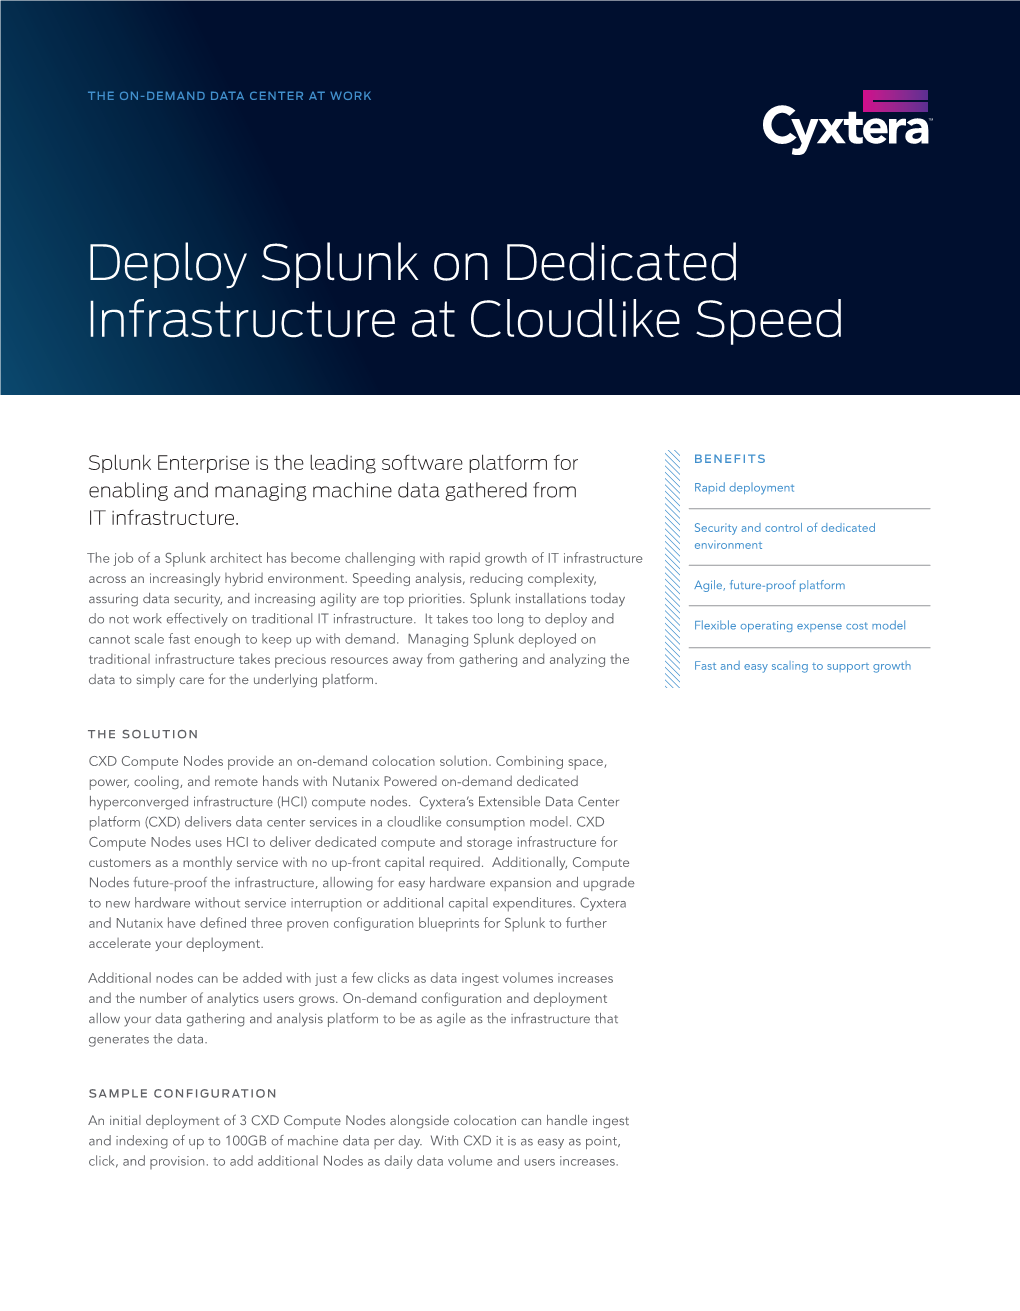 Deploy Splunk on Dedicated Infrastructure at Cloudlike Speed